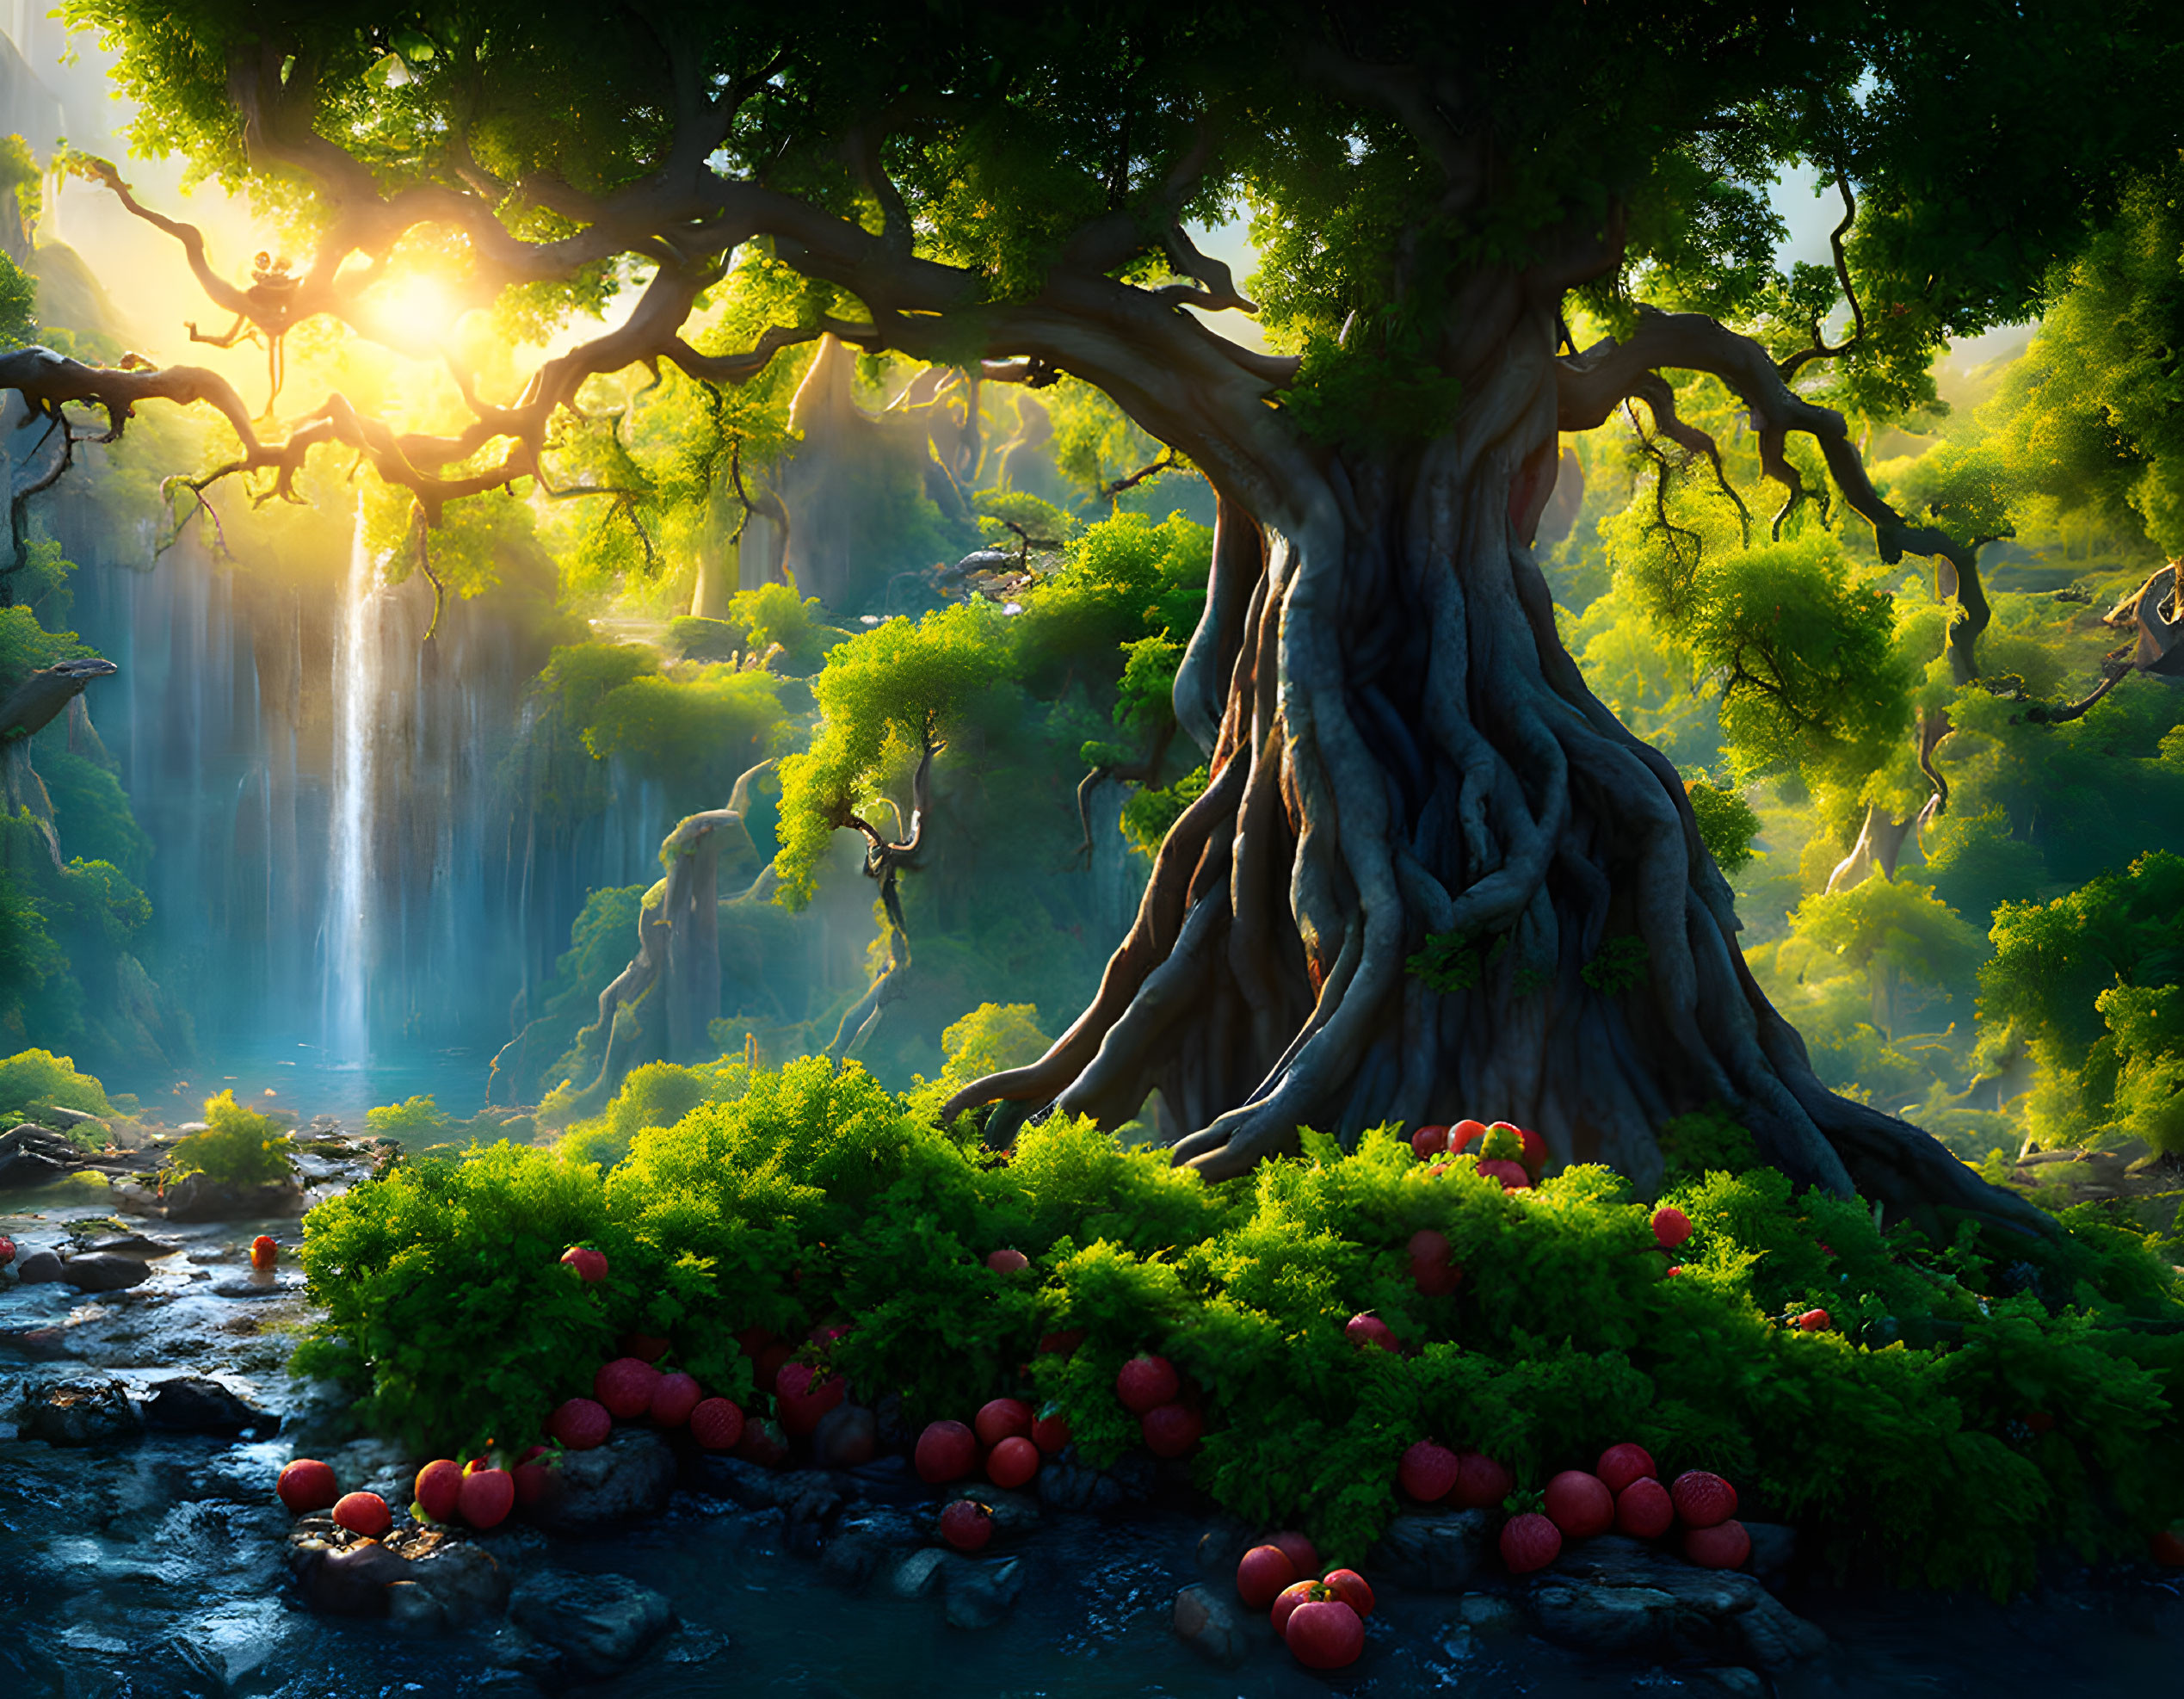 Majestic tree with sprawling roots in lush green forest with waterfall, stream, and red fruits.